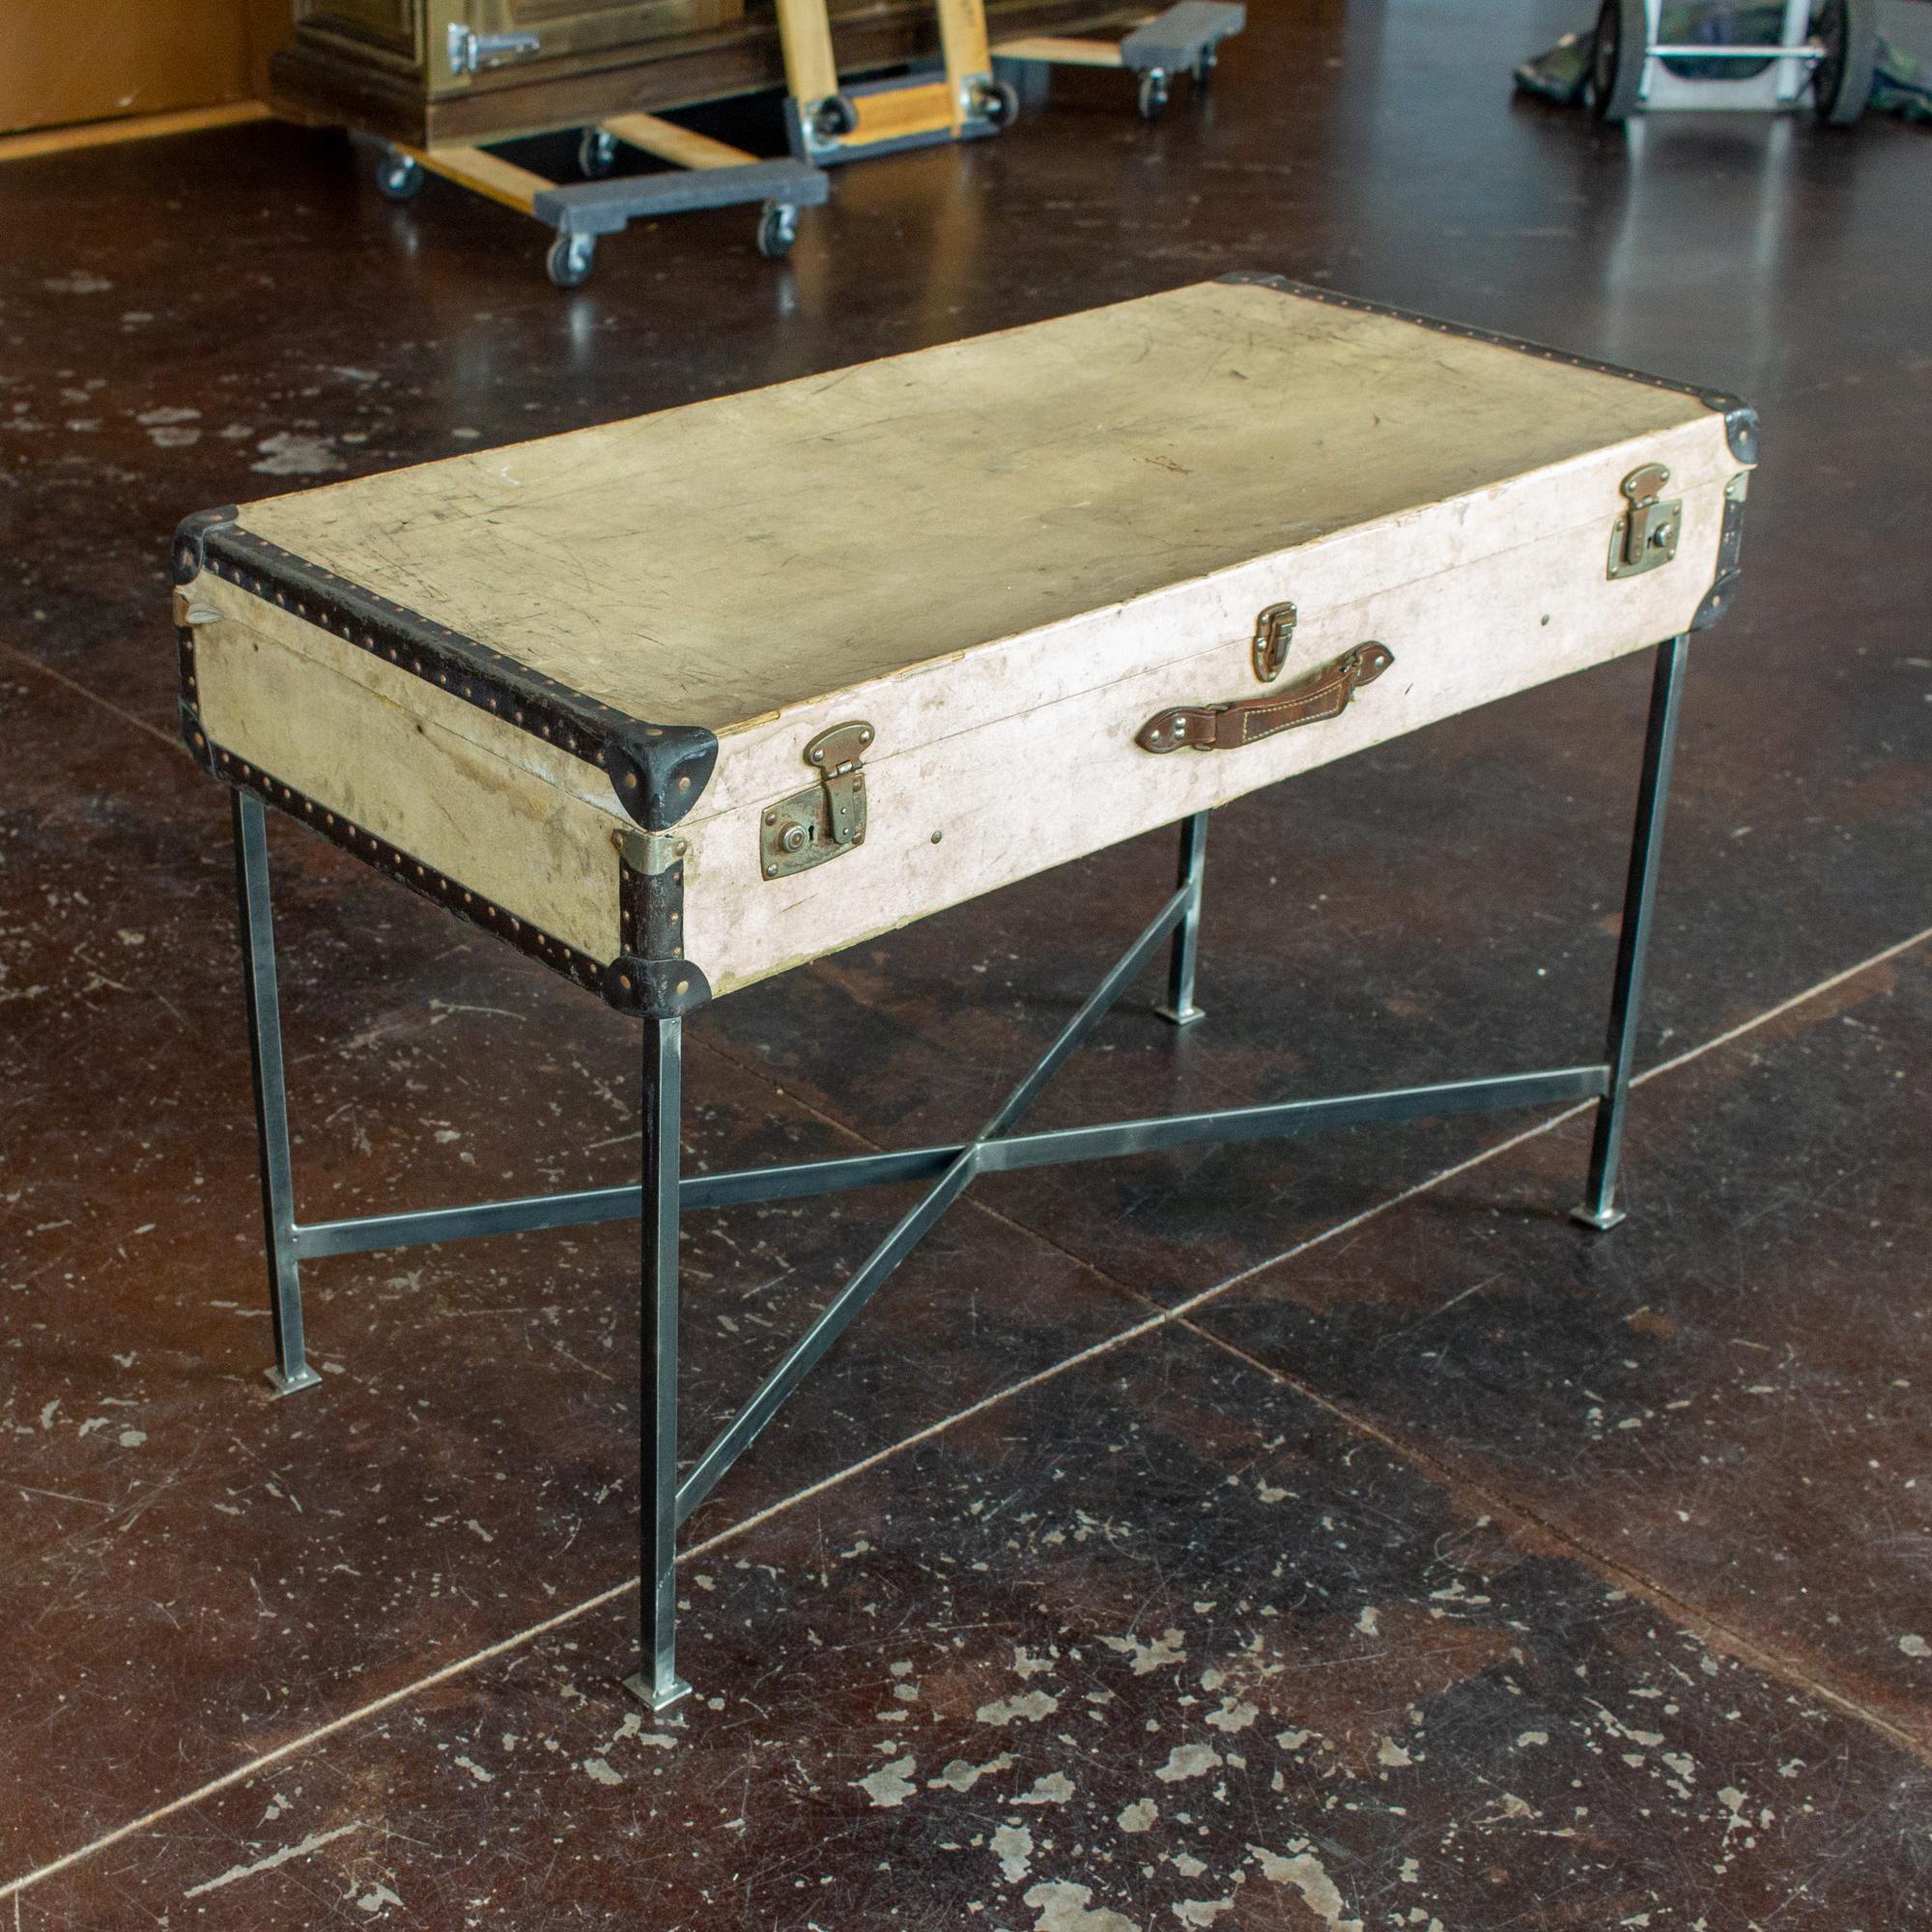 We sourced this very charming antique French luggage piece, well-traveled as evidenced by the wear, and imagined it as a side table. The custom, handcrafted base is attached to the bottom of the case, allowing the interior to be used for storage.